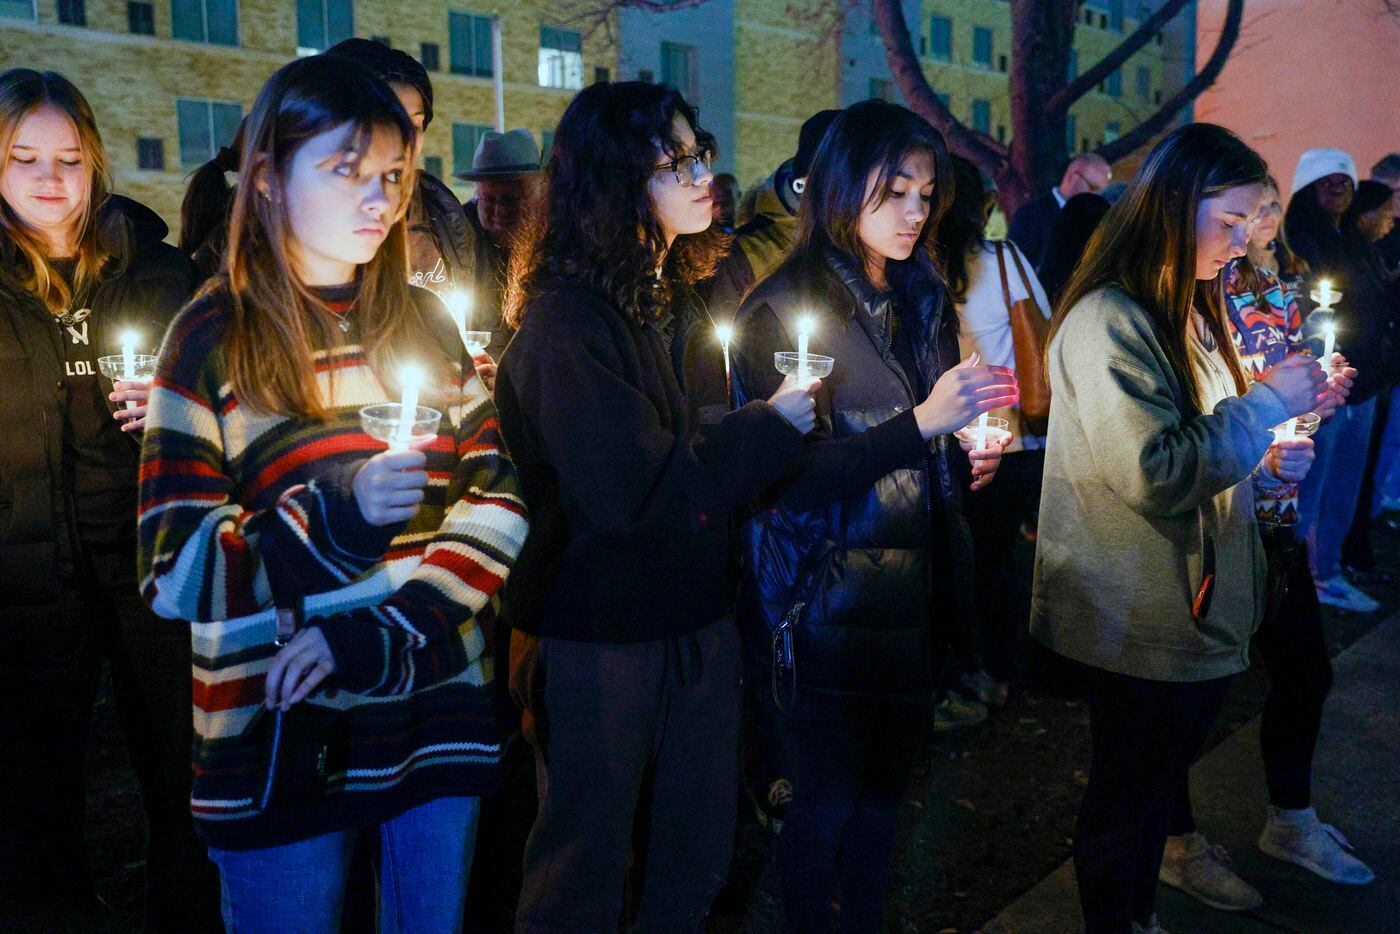 Community members hold candles during the playing of “Amazing Grace” at a candlelight vigil...